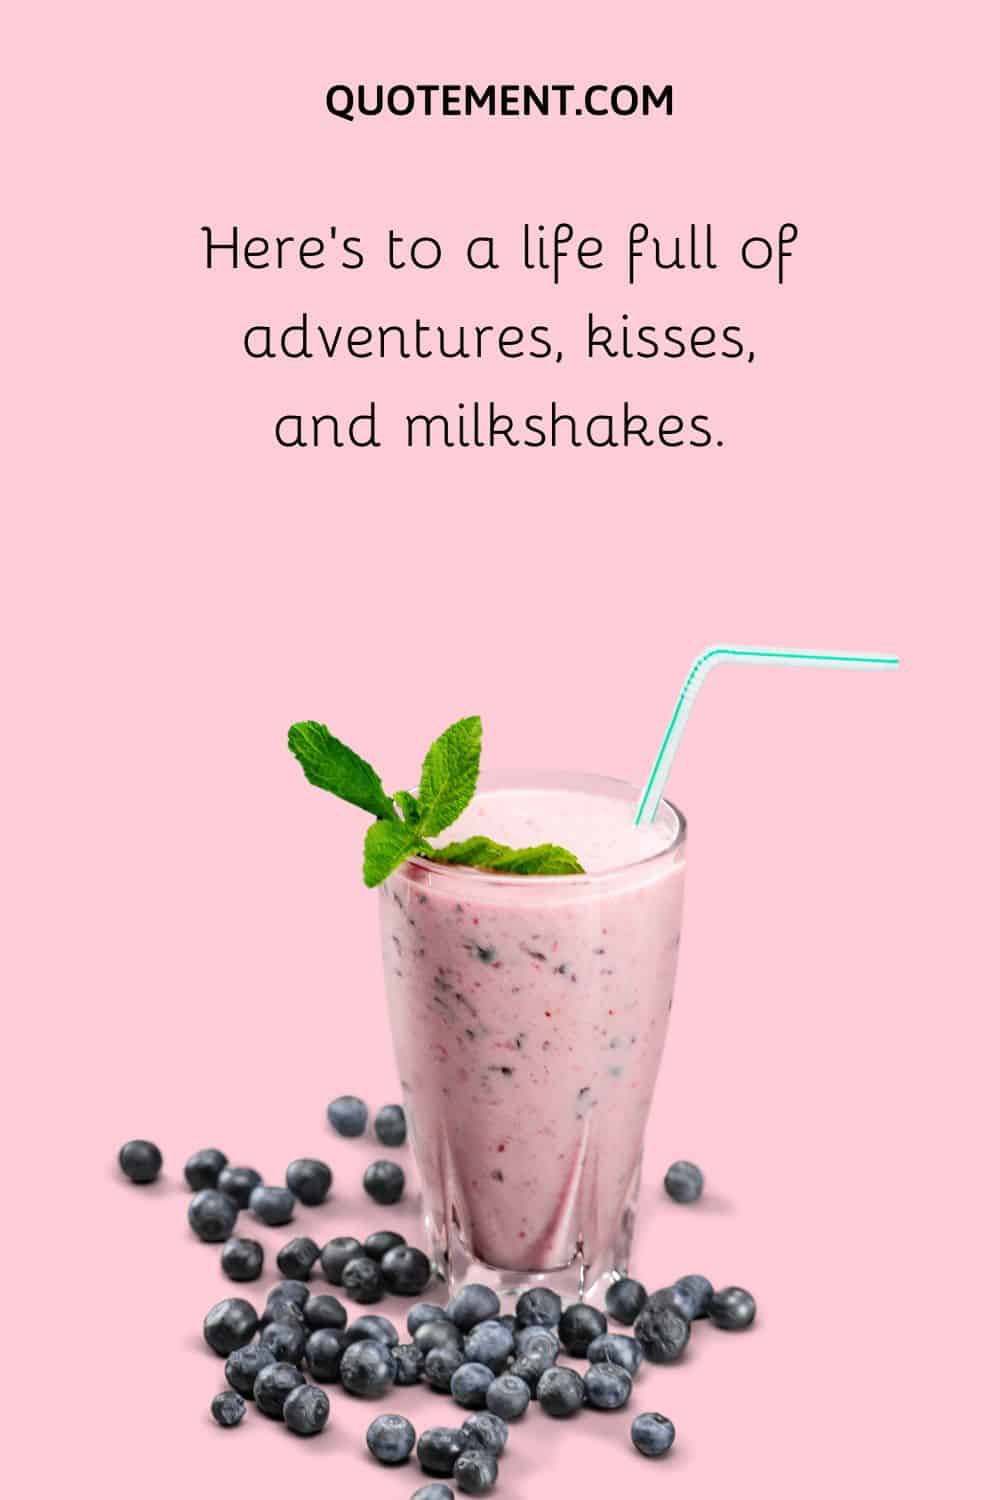 Here’s to a life full of adventures, kisses, and milkshakes.